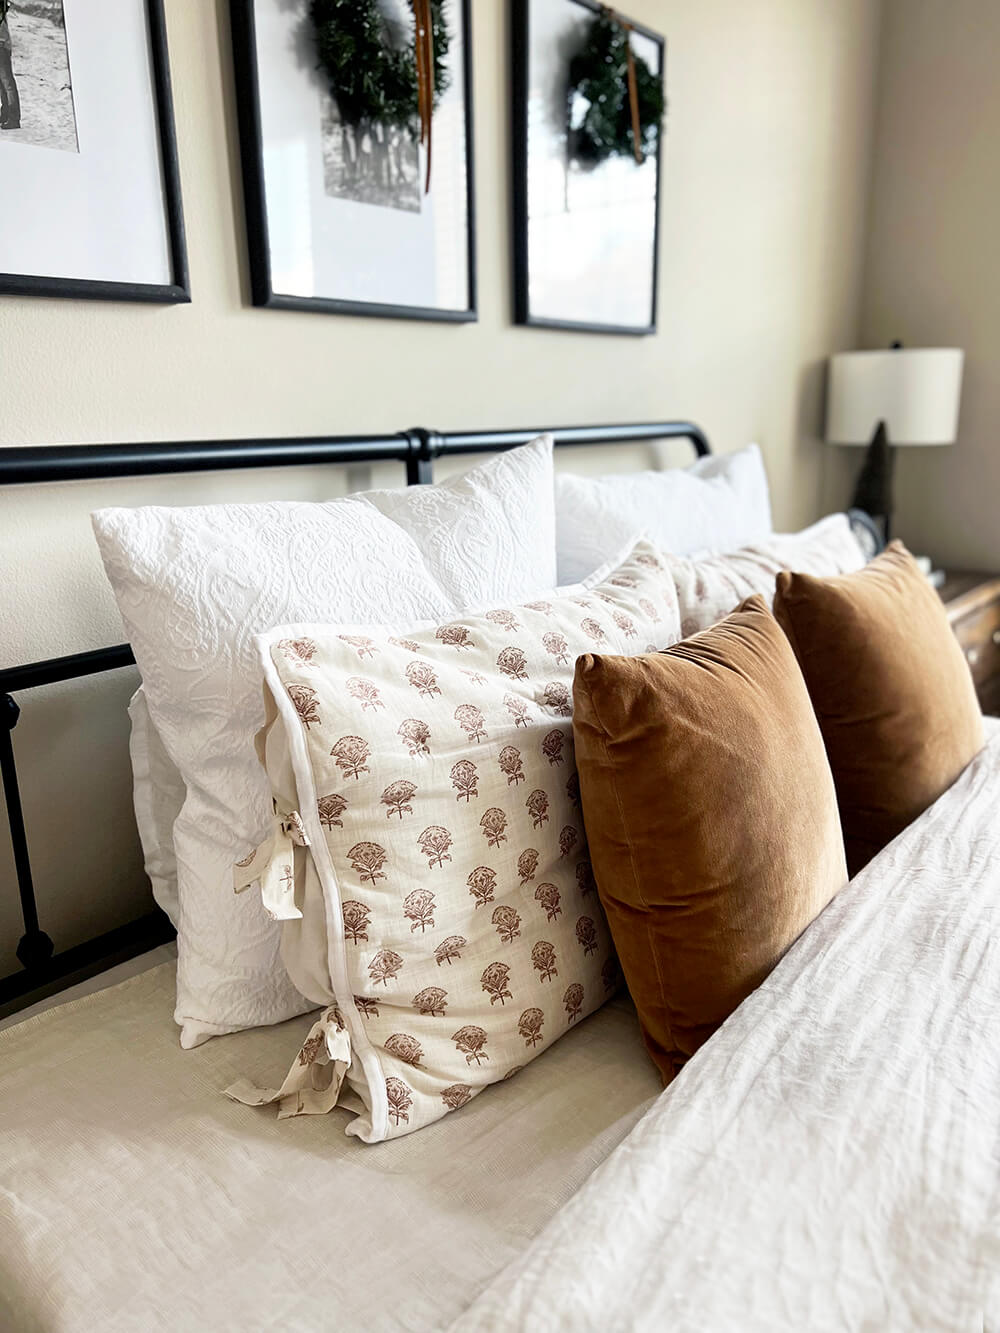 A simple and cozy modern cottage bedroom designed with classic touches and hints of the holiday season. I'm sharing a peek into this bedroom redo as well as a few simple ways you can create warm and inviting space perfect for the winter season. Dive in at KaraLayne.com!